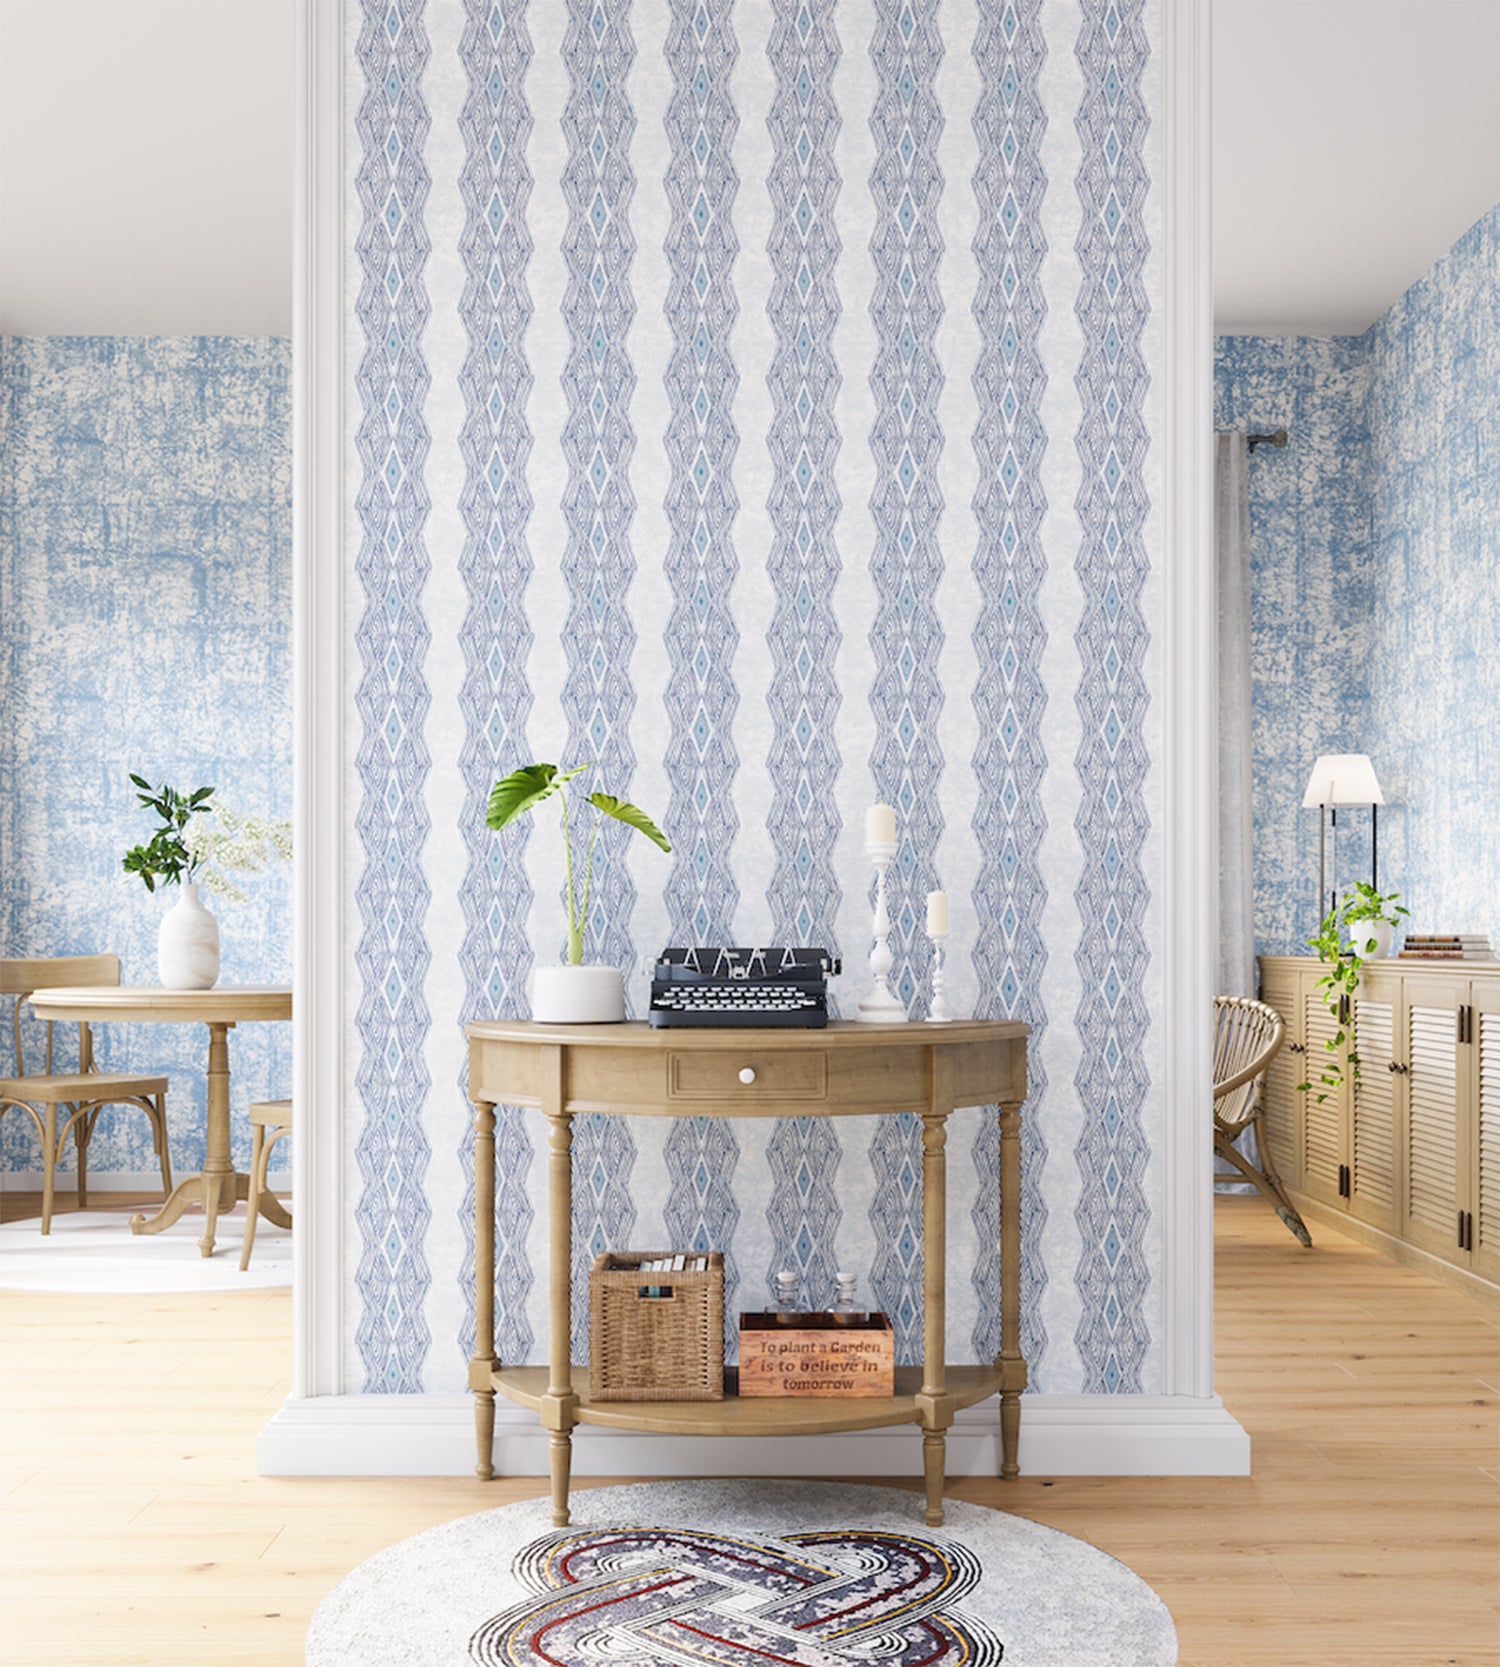 A maximalist living space with an accent wall papered in an intricate diamond stripe print in blue and cream.